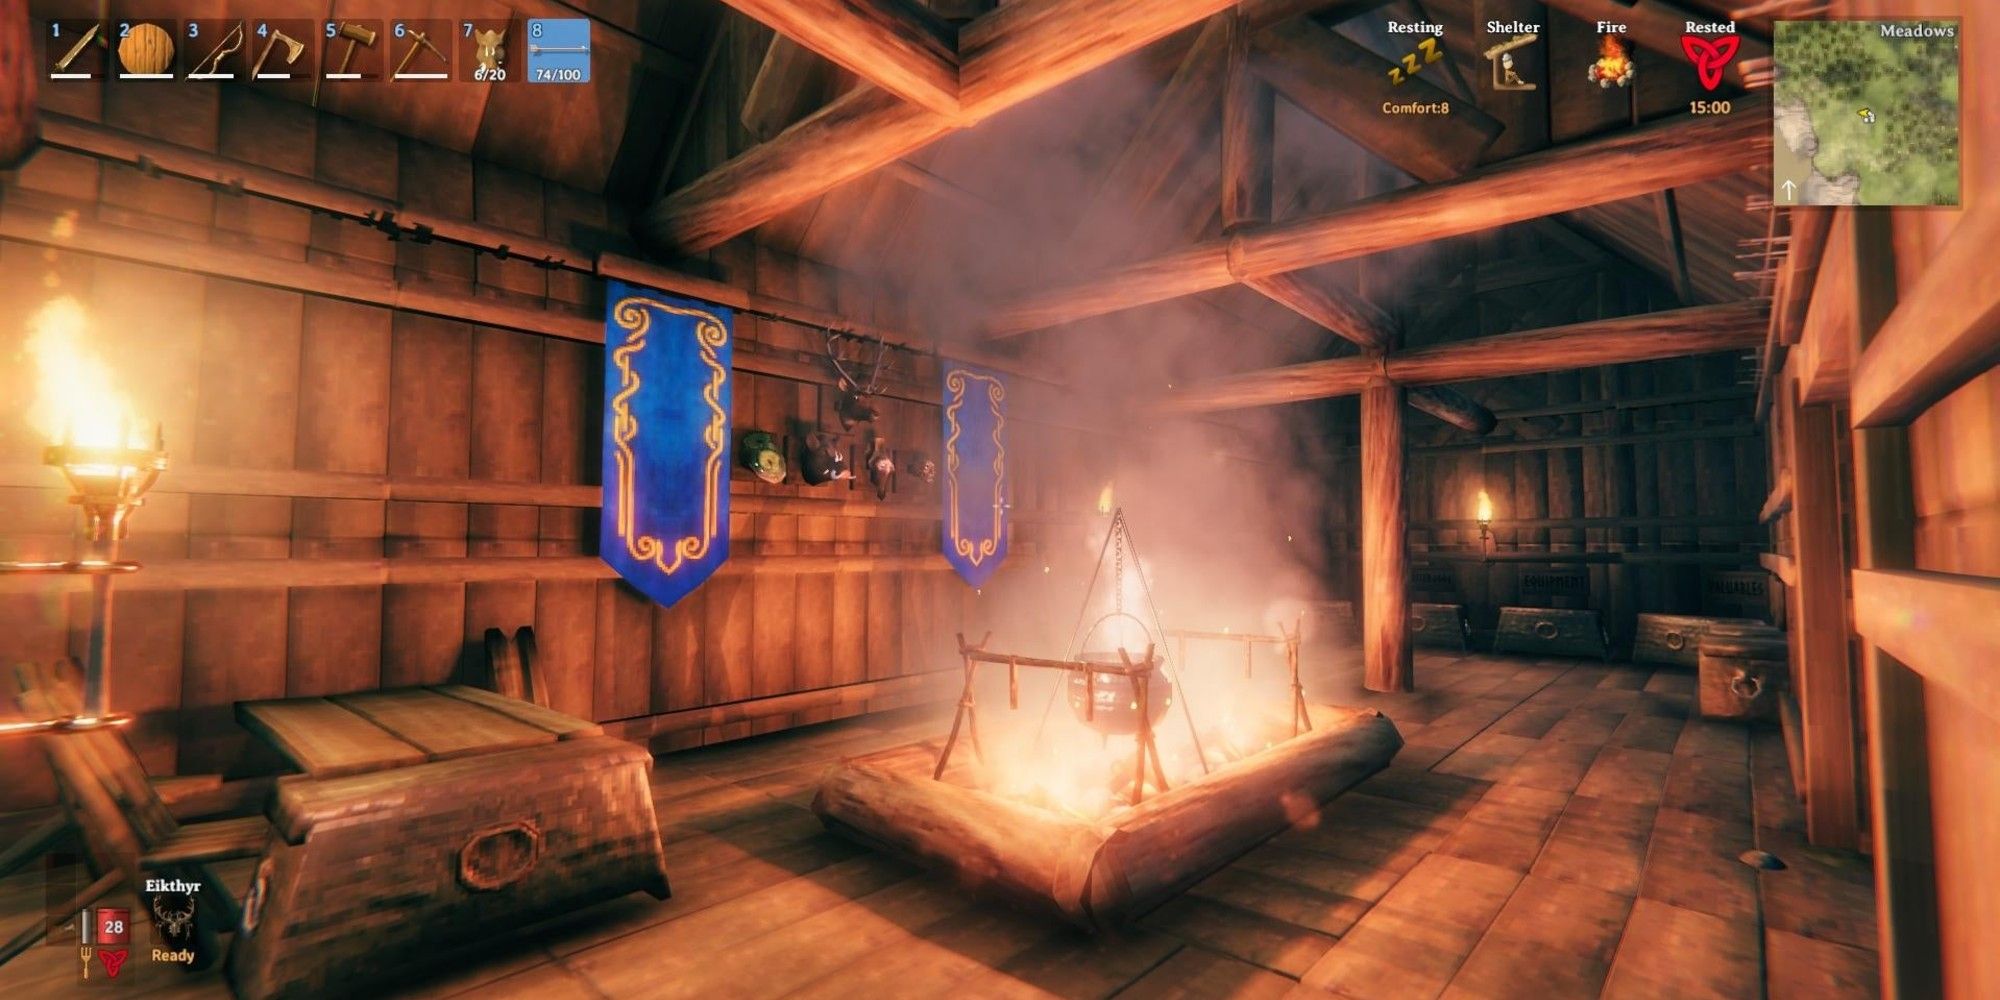 A player places an open, ventilated fire in the middle of their longhouse in Valheim